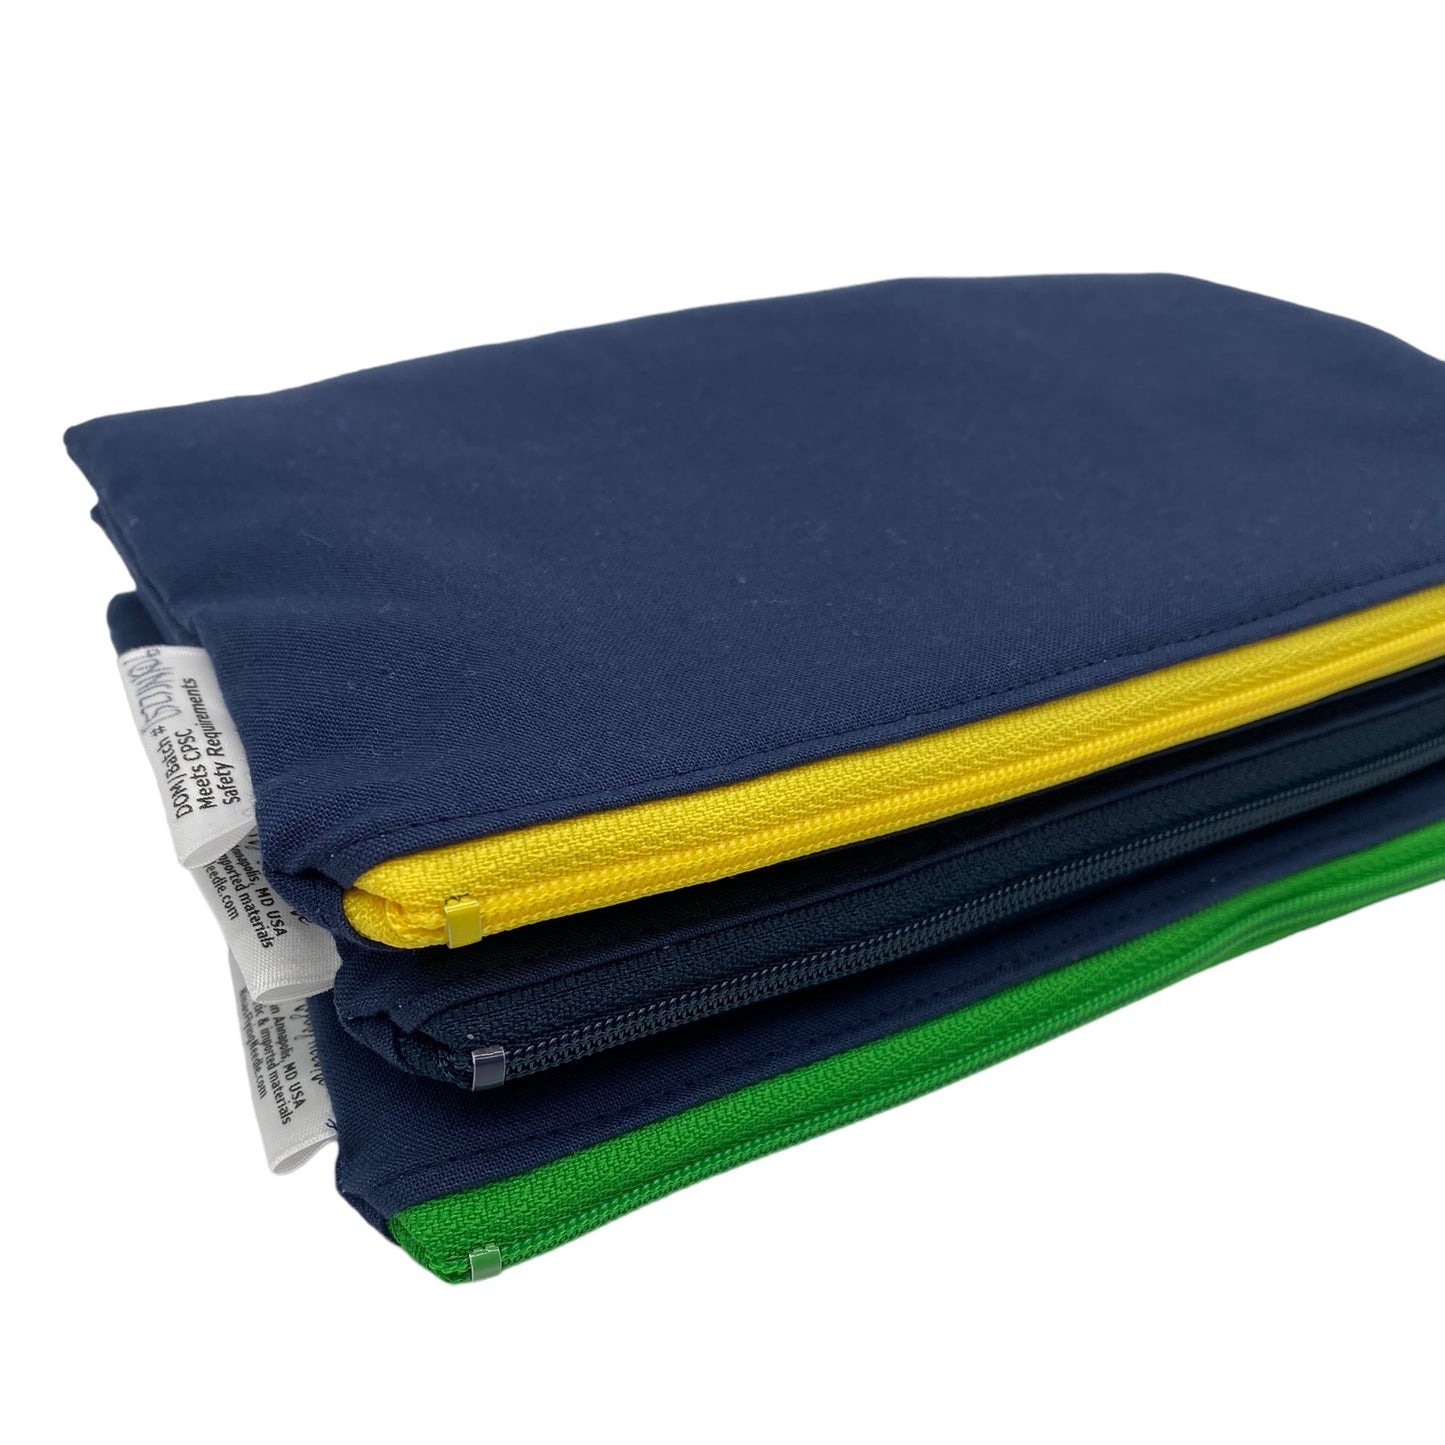 Sandwich Sized Reusable Zippered Bag Solid Blue Navy